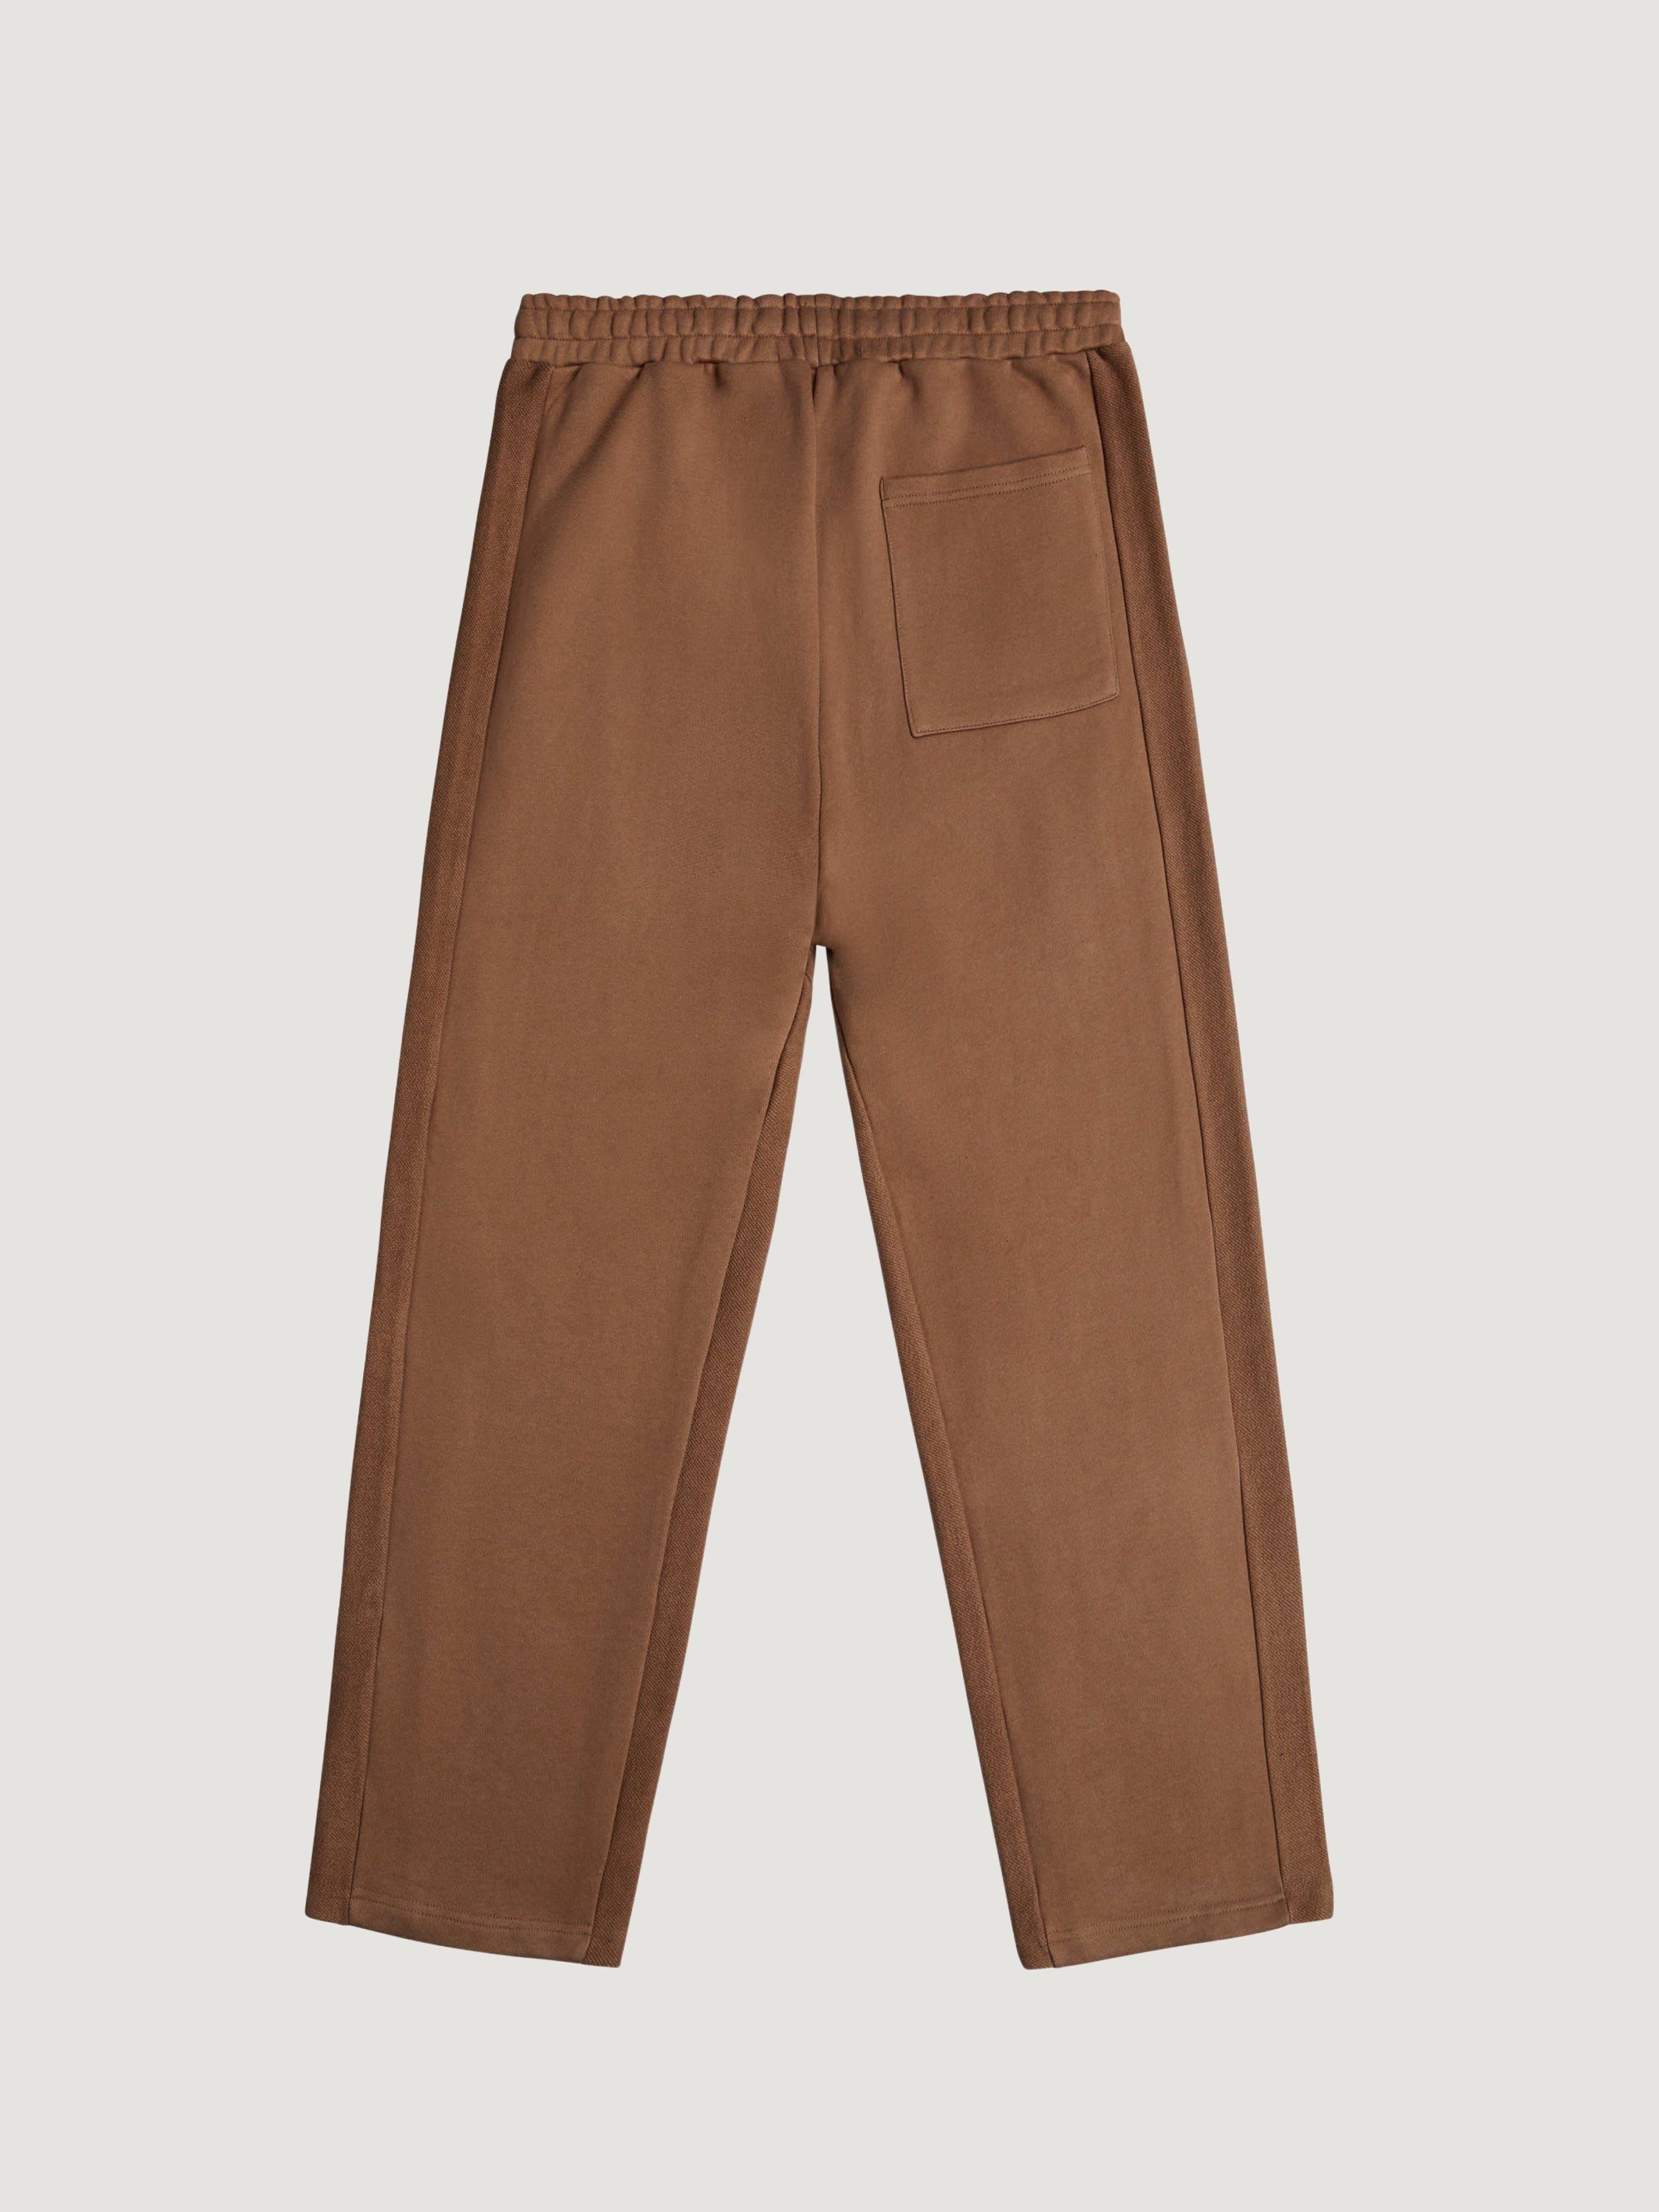 INSIDE OUT SWEATPANTS BROWN - ATTODE